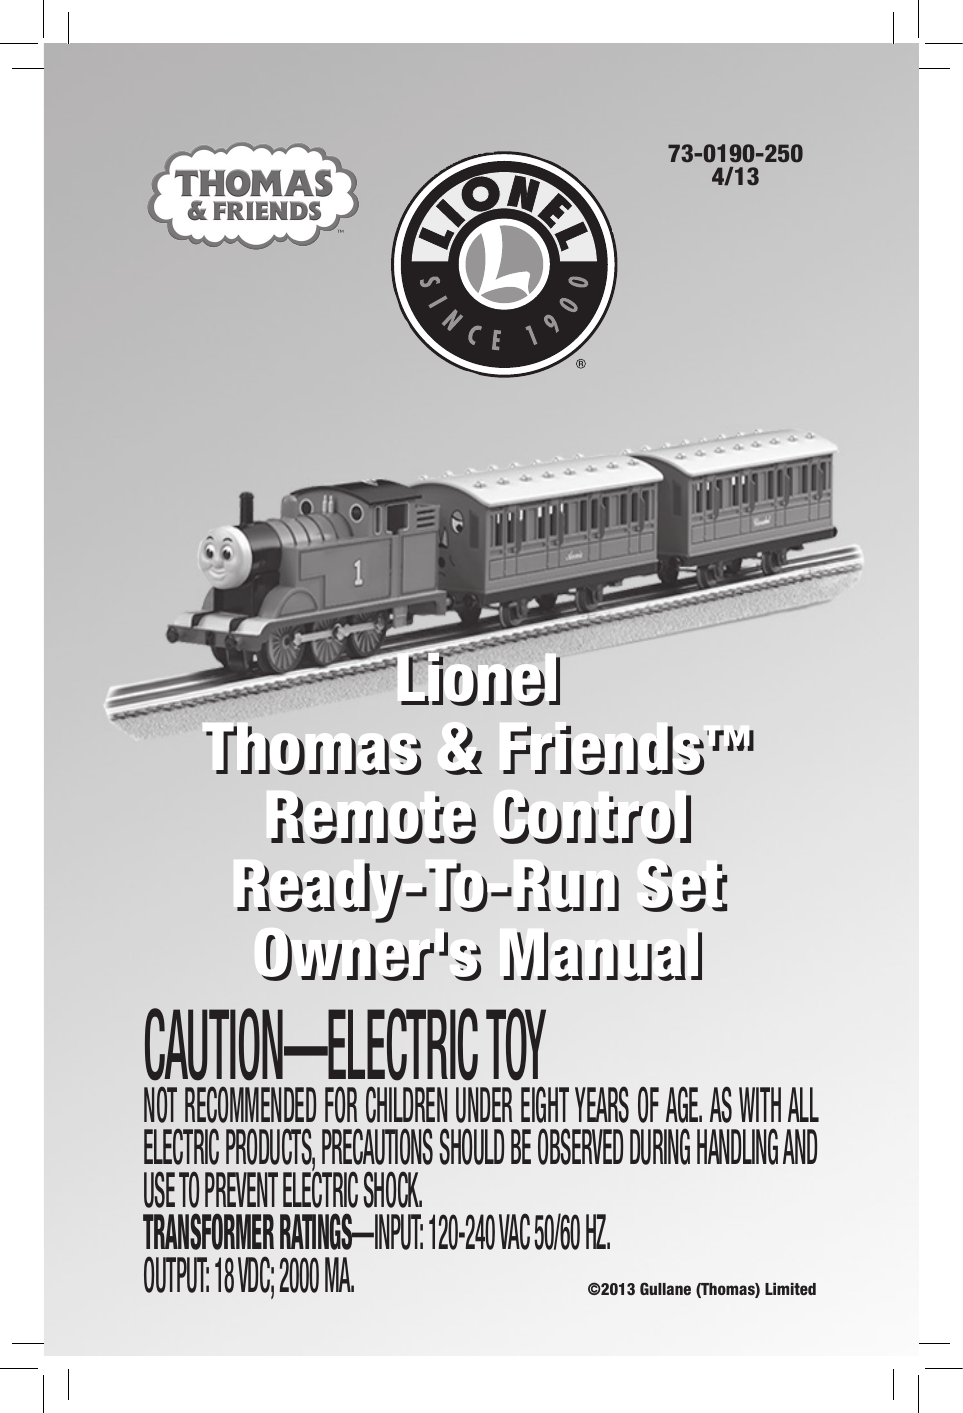 LionelThomas &amp; Friends™  Remote Control  Ready-To-Run Set Owner&apos;s Manual73-0190-2504/13CAUTION—ELECTRIC TOYNOT RECOMMENDED FOR CHILDREN UNDER EIGHT YEARS OF AGE. AS WITH ALL ELECTRIC PRODUCTS, PRECAUTIONS SHOULD BE OBSERVED DURING HANDLING AND USE TO PREVENT ELECTRIC SHOCK. TRANSFORMER RATINGS—INPUT: 120-240 VAC 50/60 HZ. OUTPUT: 18 VDC; 2000 MA.LionelThomas &amp; Friends™  Remote Control  Ready-To-Run Set Owner&apos;s Manual©2013 Gullane (Thomas) Limited